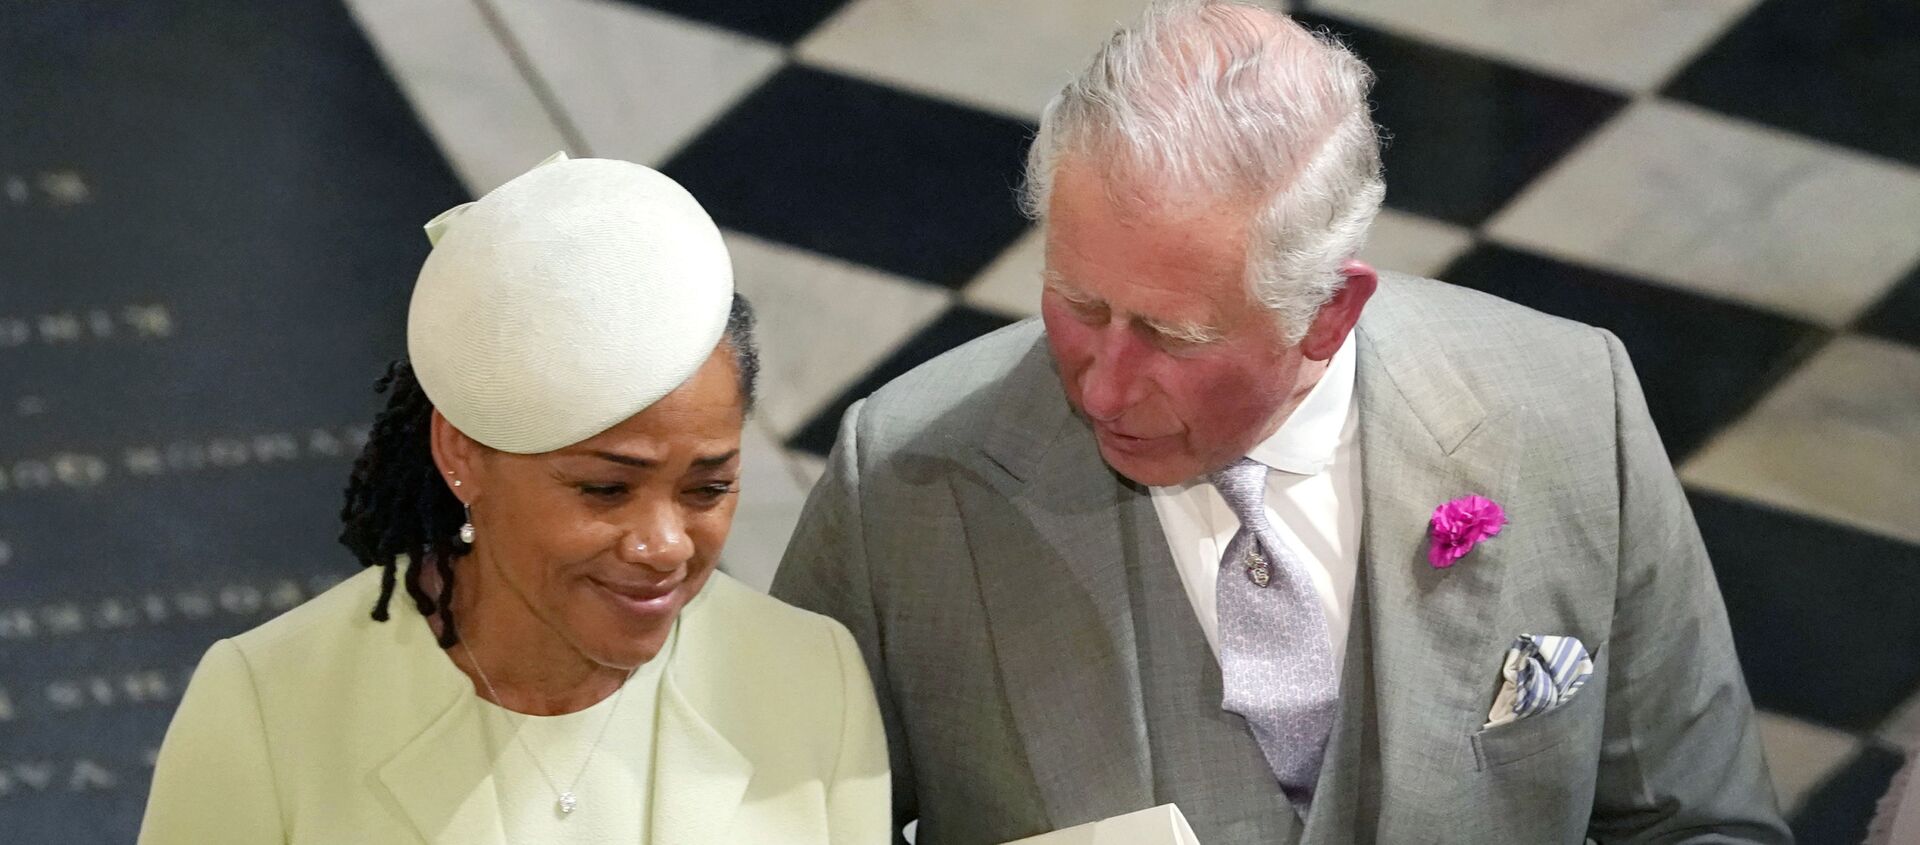 Doria Ragland - the Duchess of Sussex's mother speaks to Prince Charles during the royal wedding in 2018 - Sputnik International, 1920, 12.03.2021